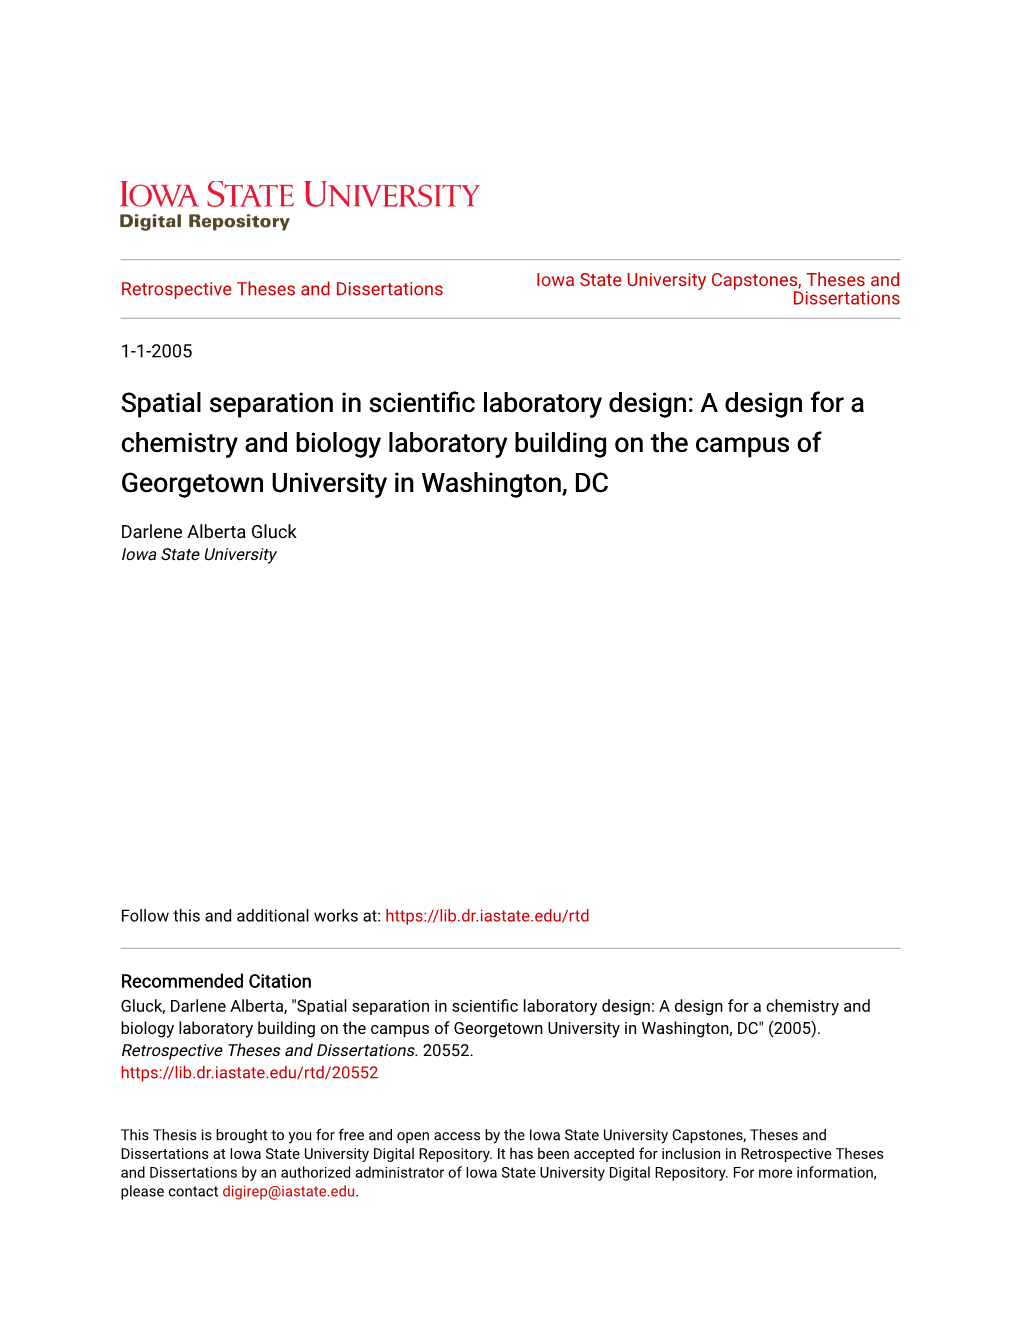 Spatial Separation in Scientific Laboratory Design: a Design for a Chemistry and Biology Laboratory Building on the Campus of Georgetown University in Washington, DC